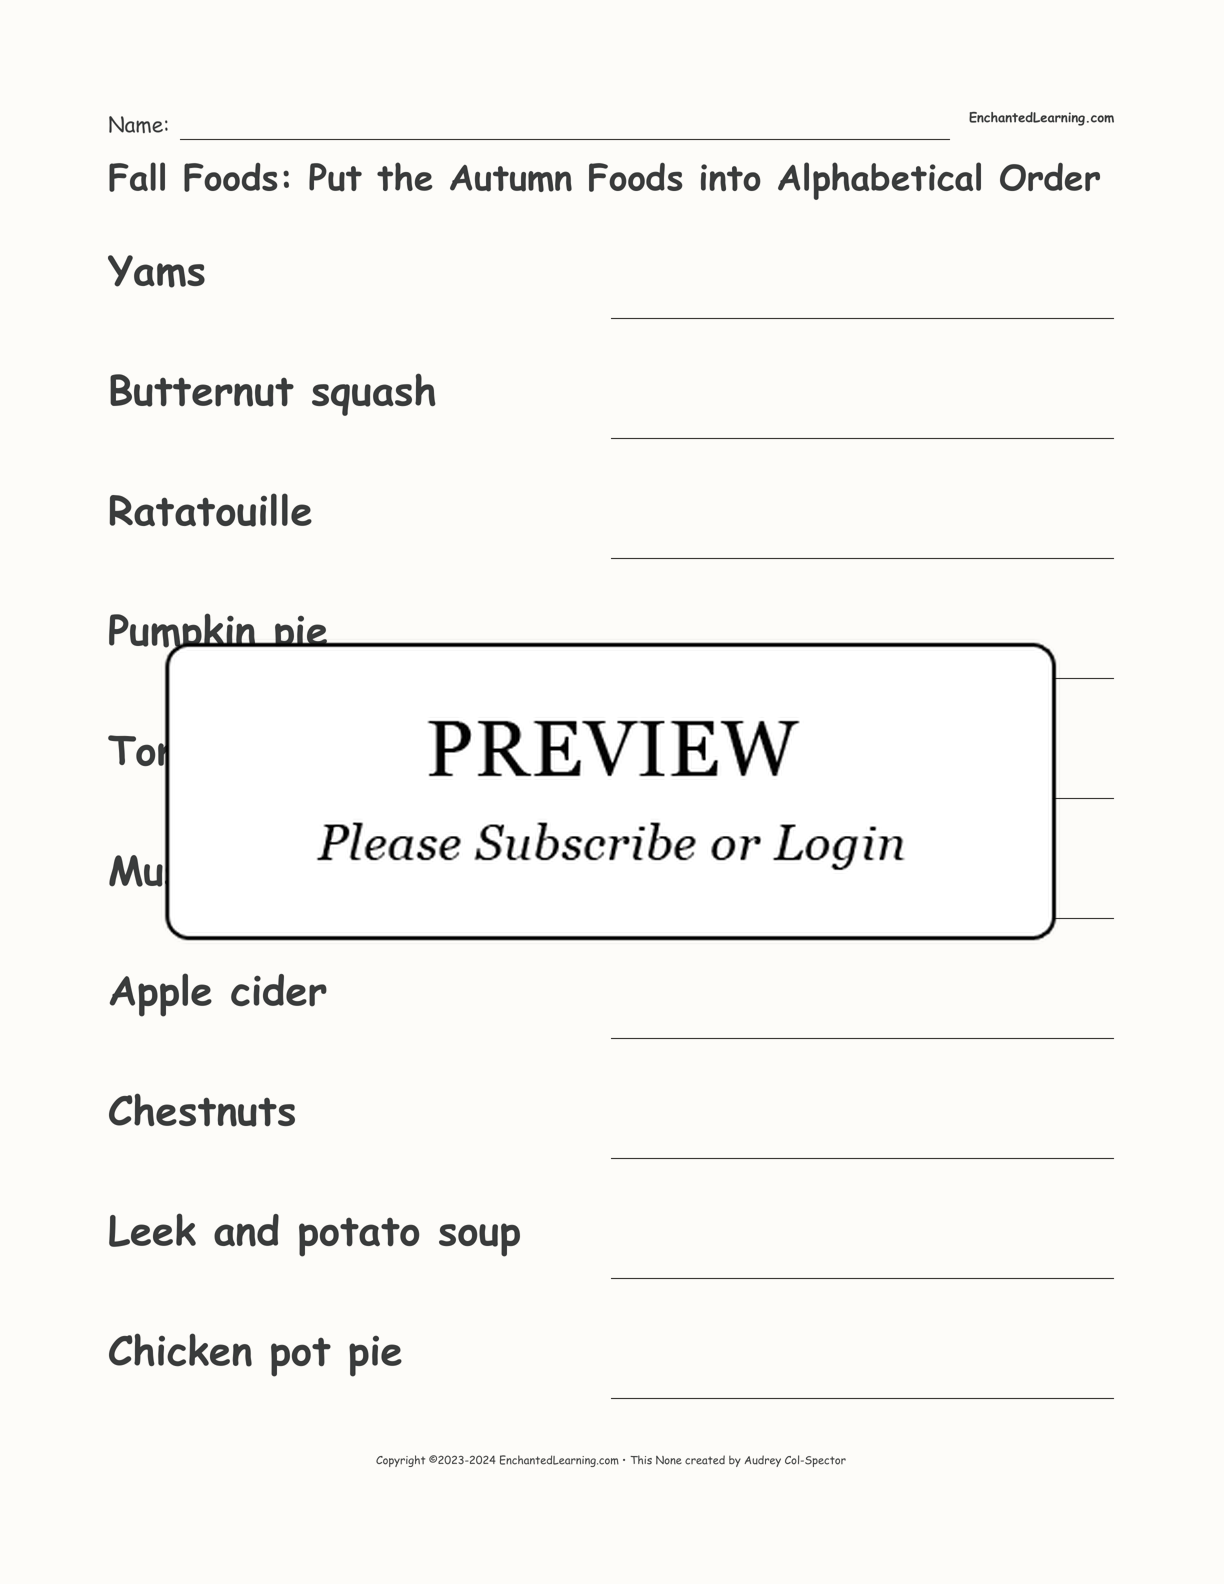 Fall Foods: Put the Autumn Foods into Alphabetical Order interactive worksheet page 1